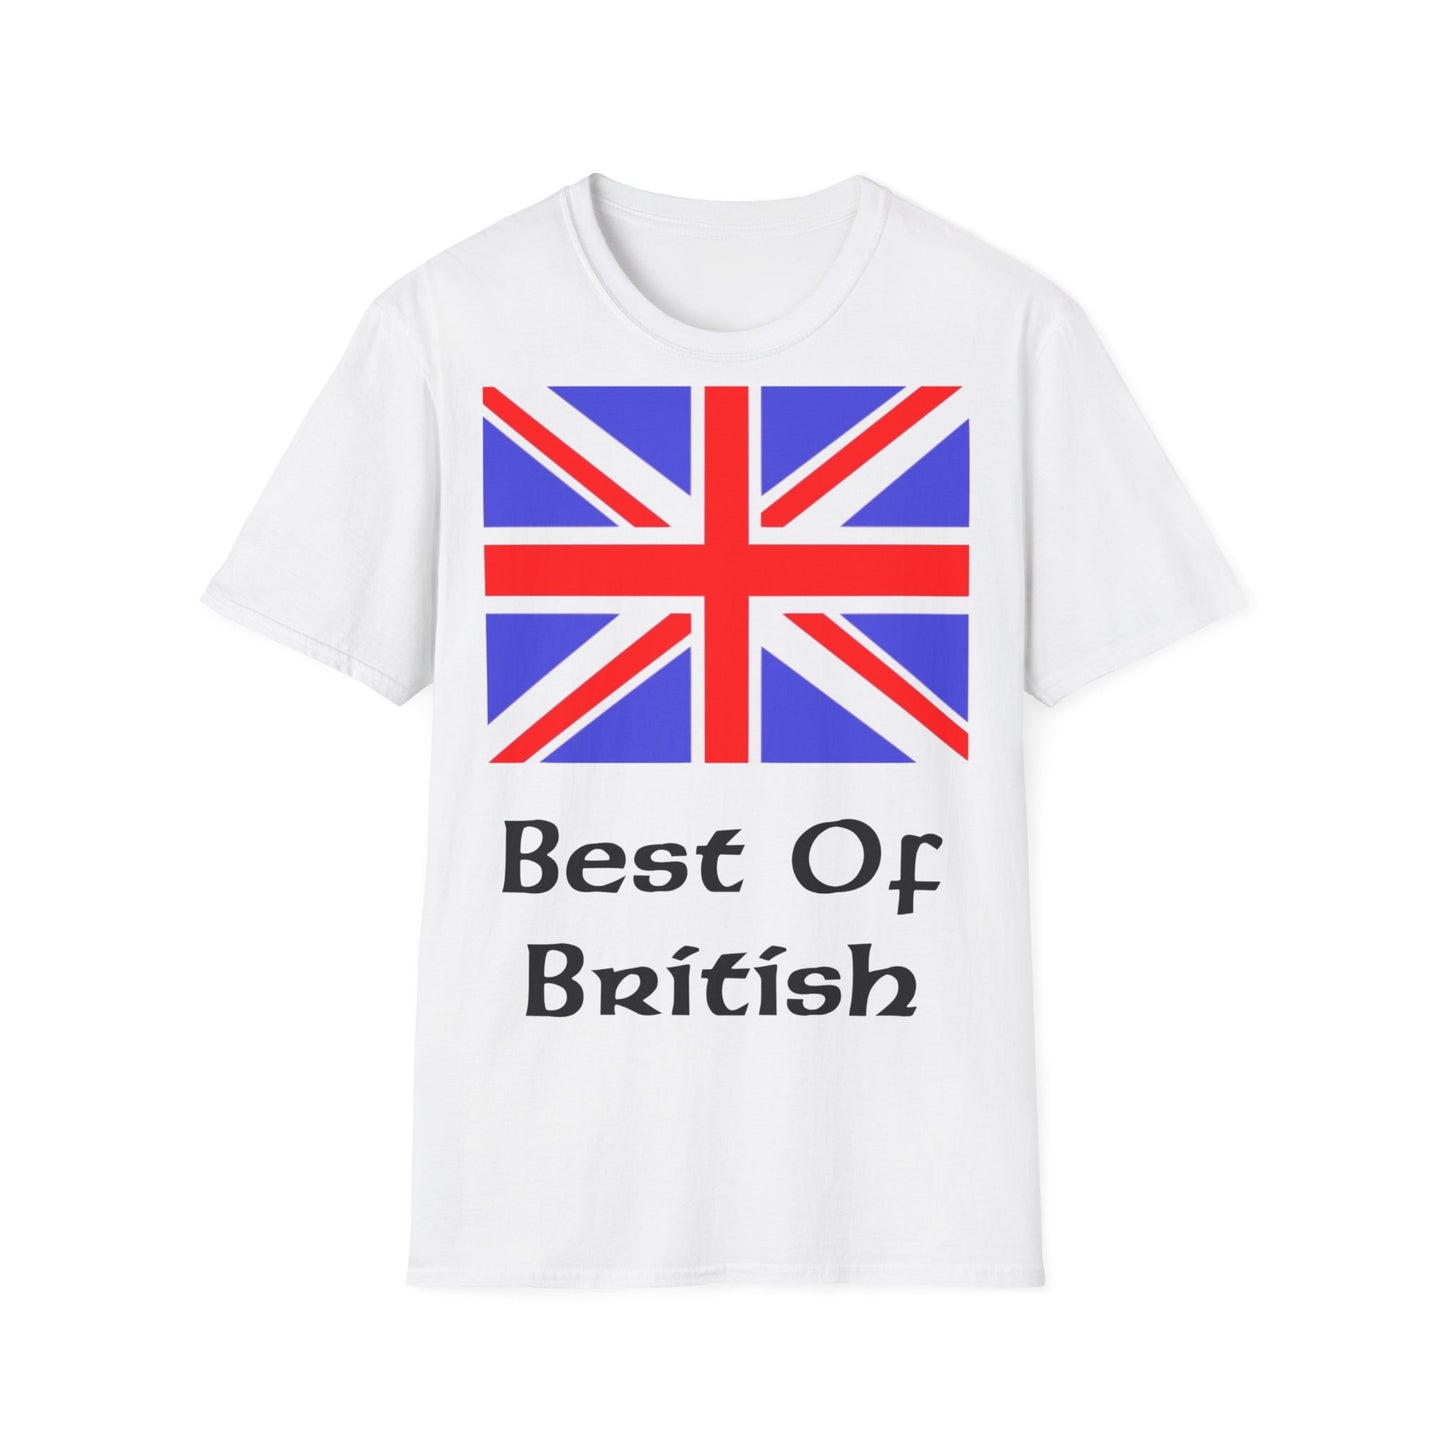 A white t-shirt with a design of the Union Jack flag and the quote: Best Of British underneath